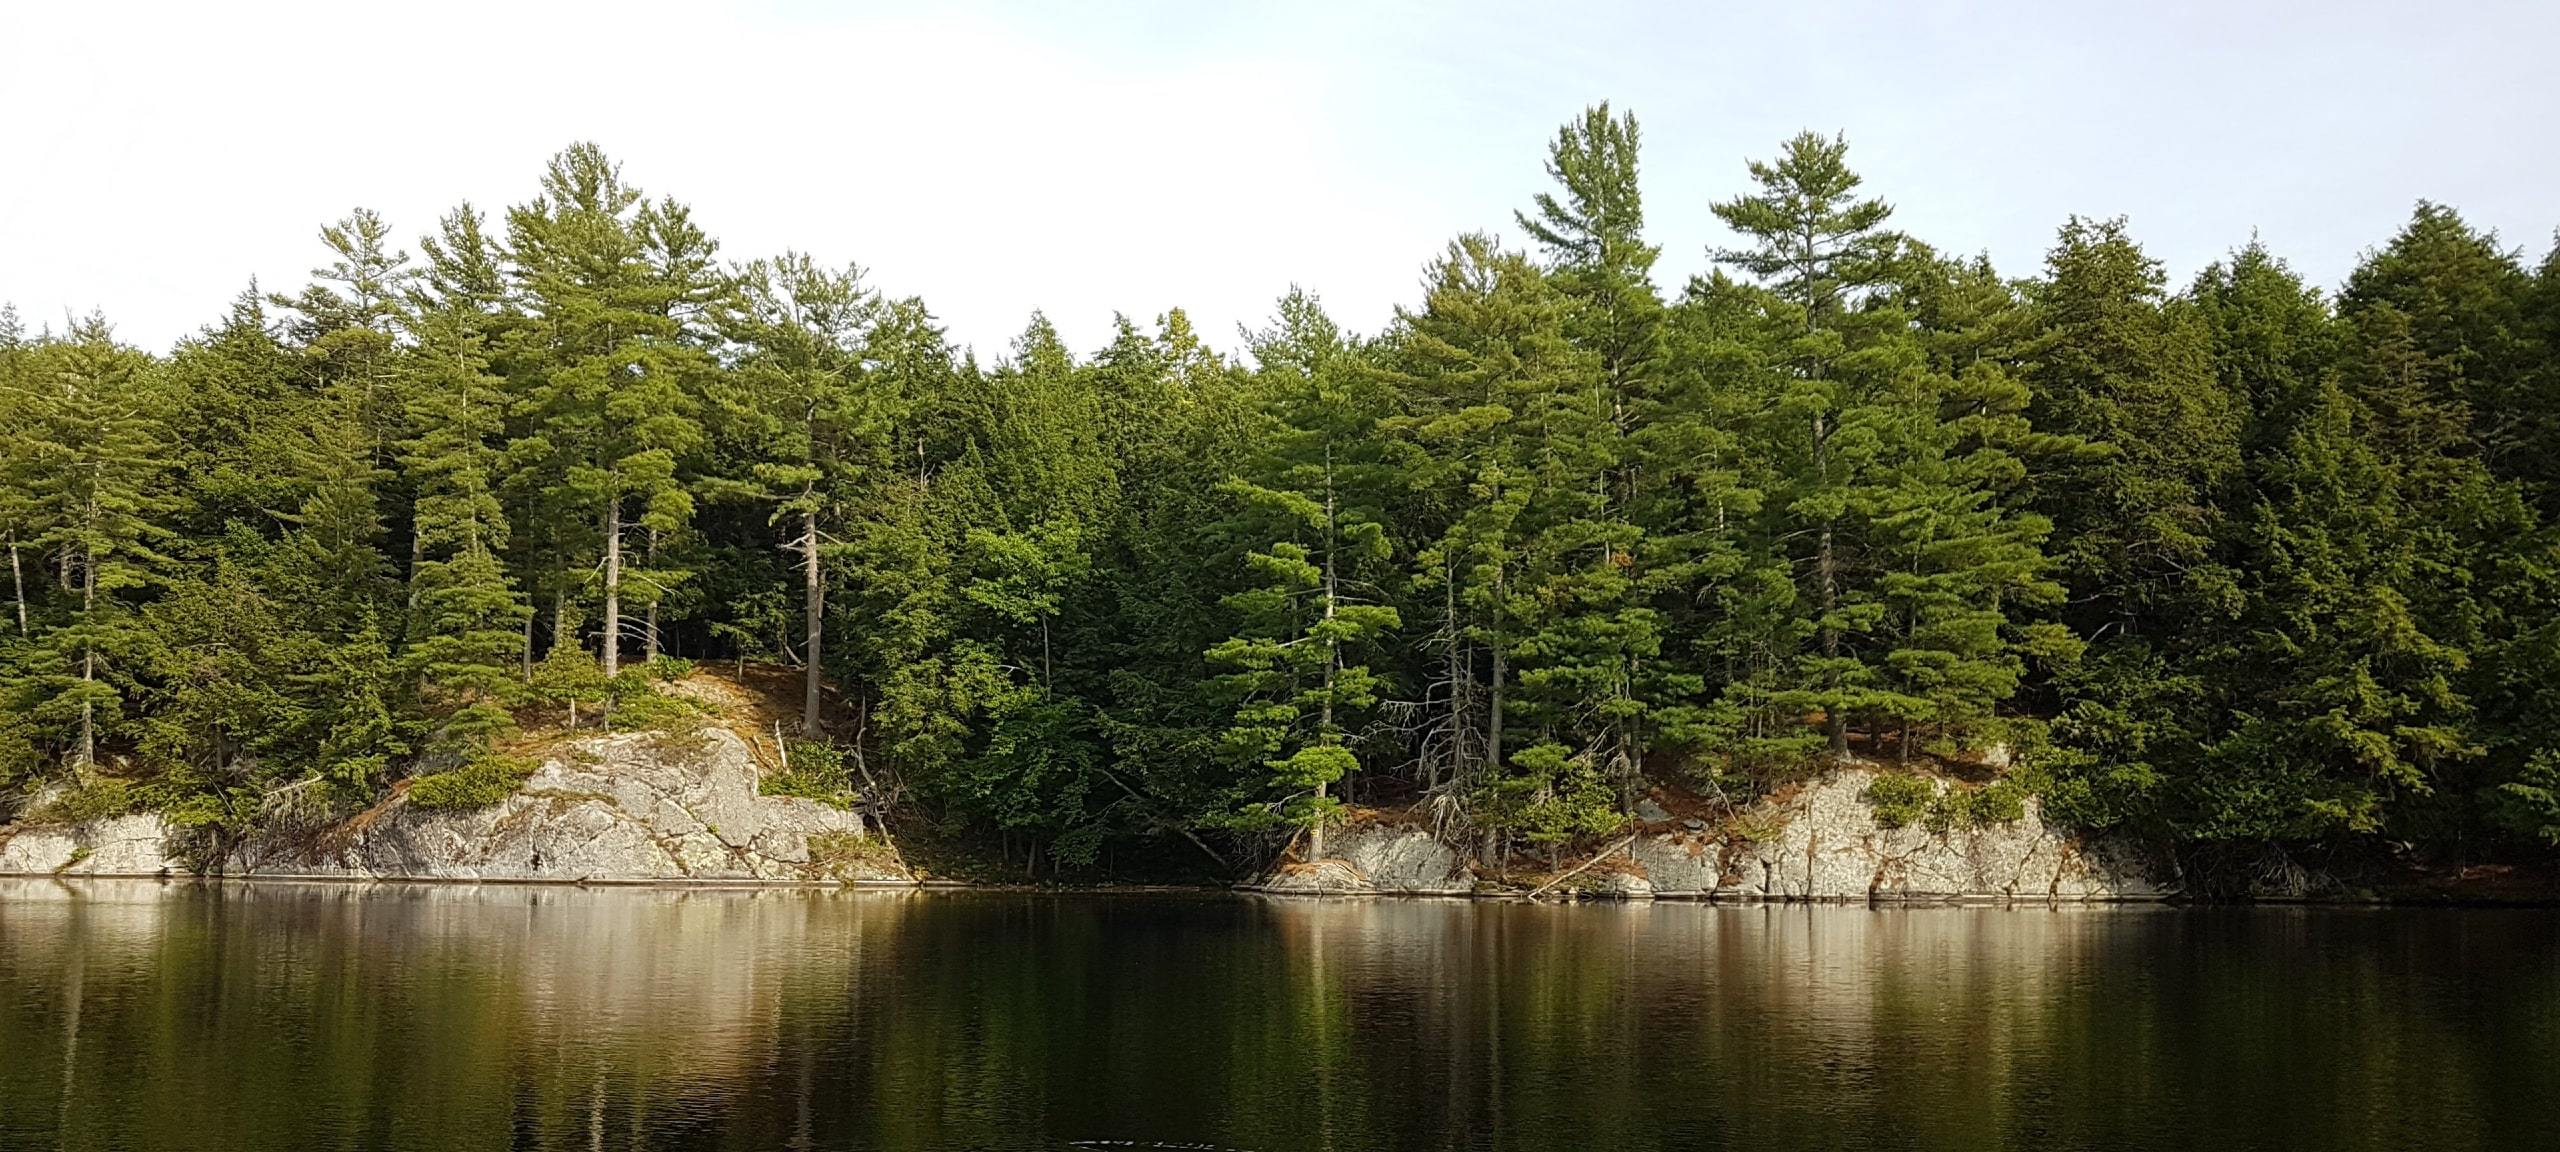 Rocks and forest on Manitouwabing Lake in McKellar, ON